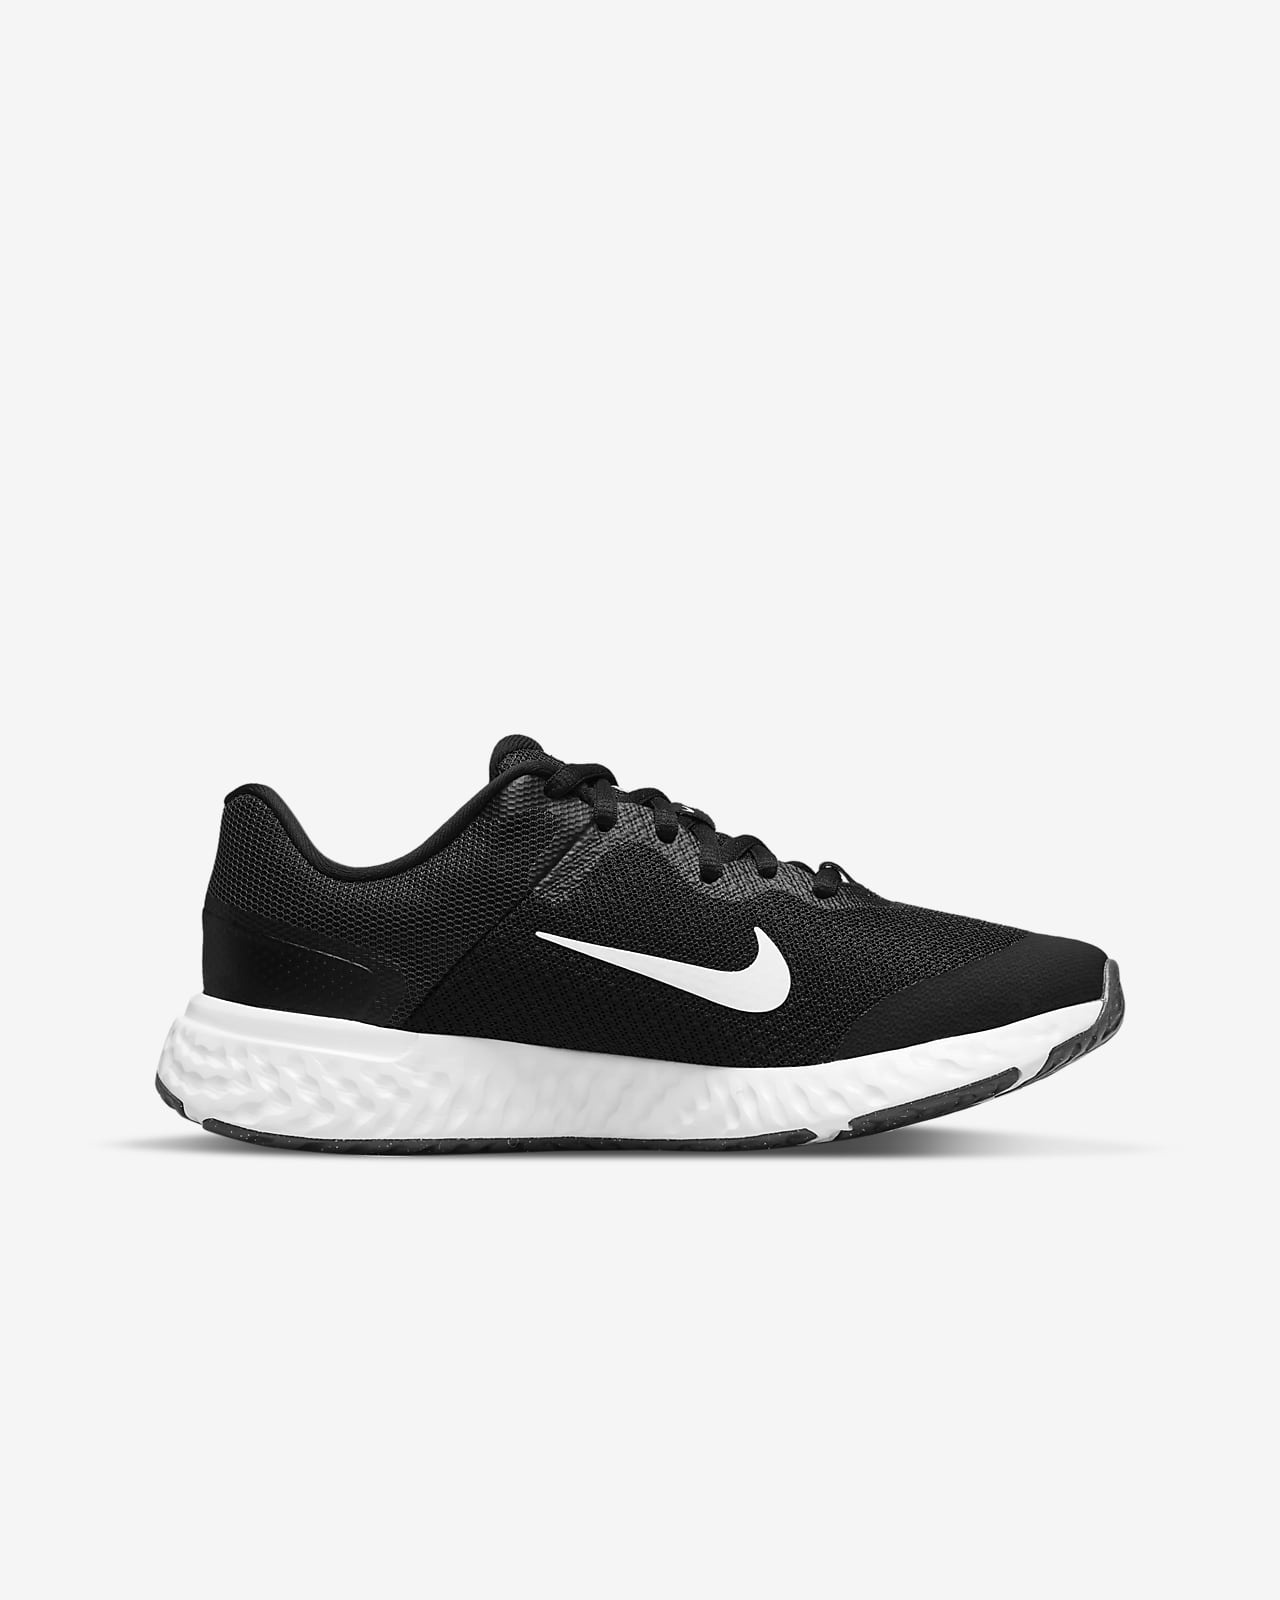 Kids' Road Running Shoes (Wide). Nike 